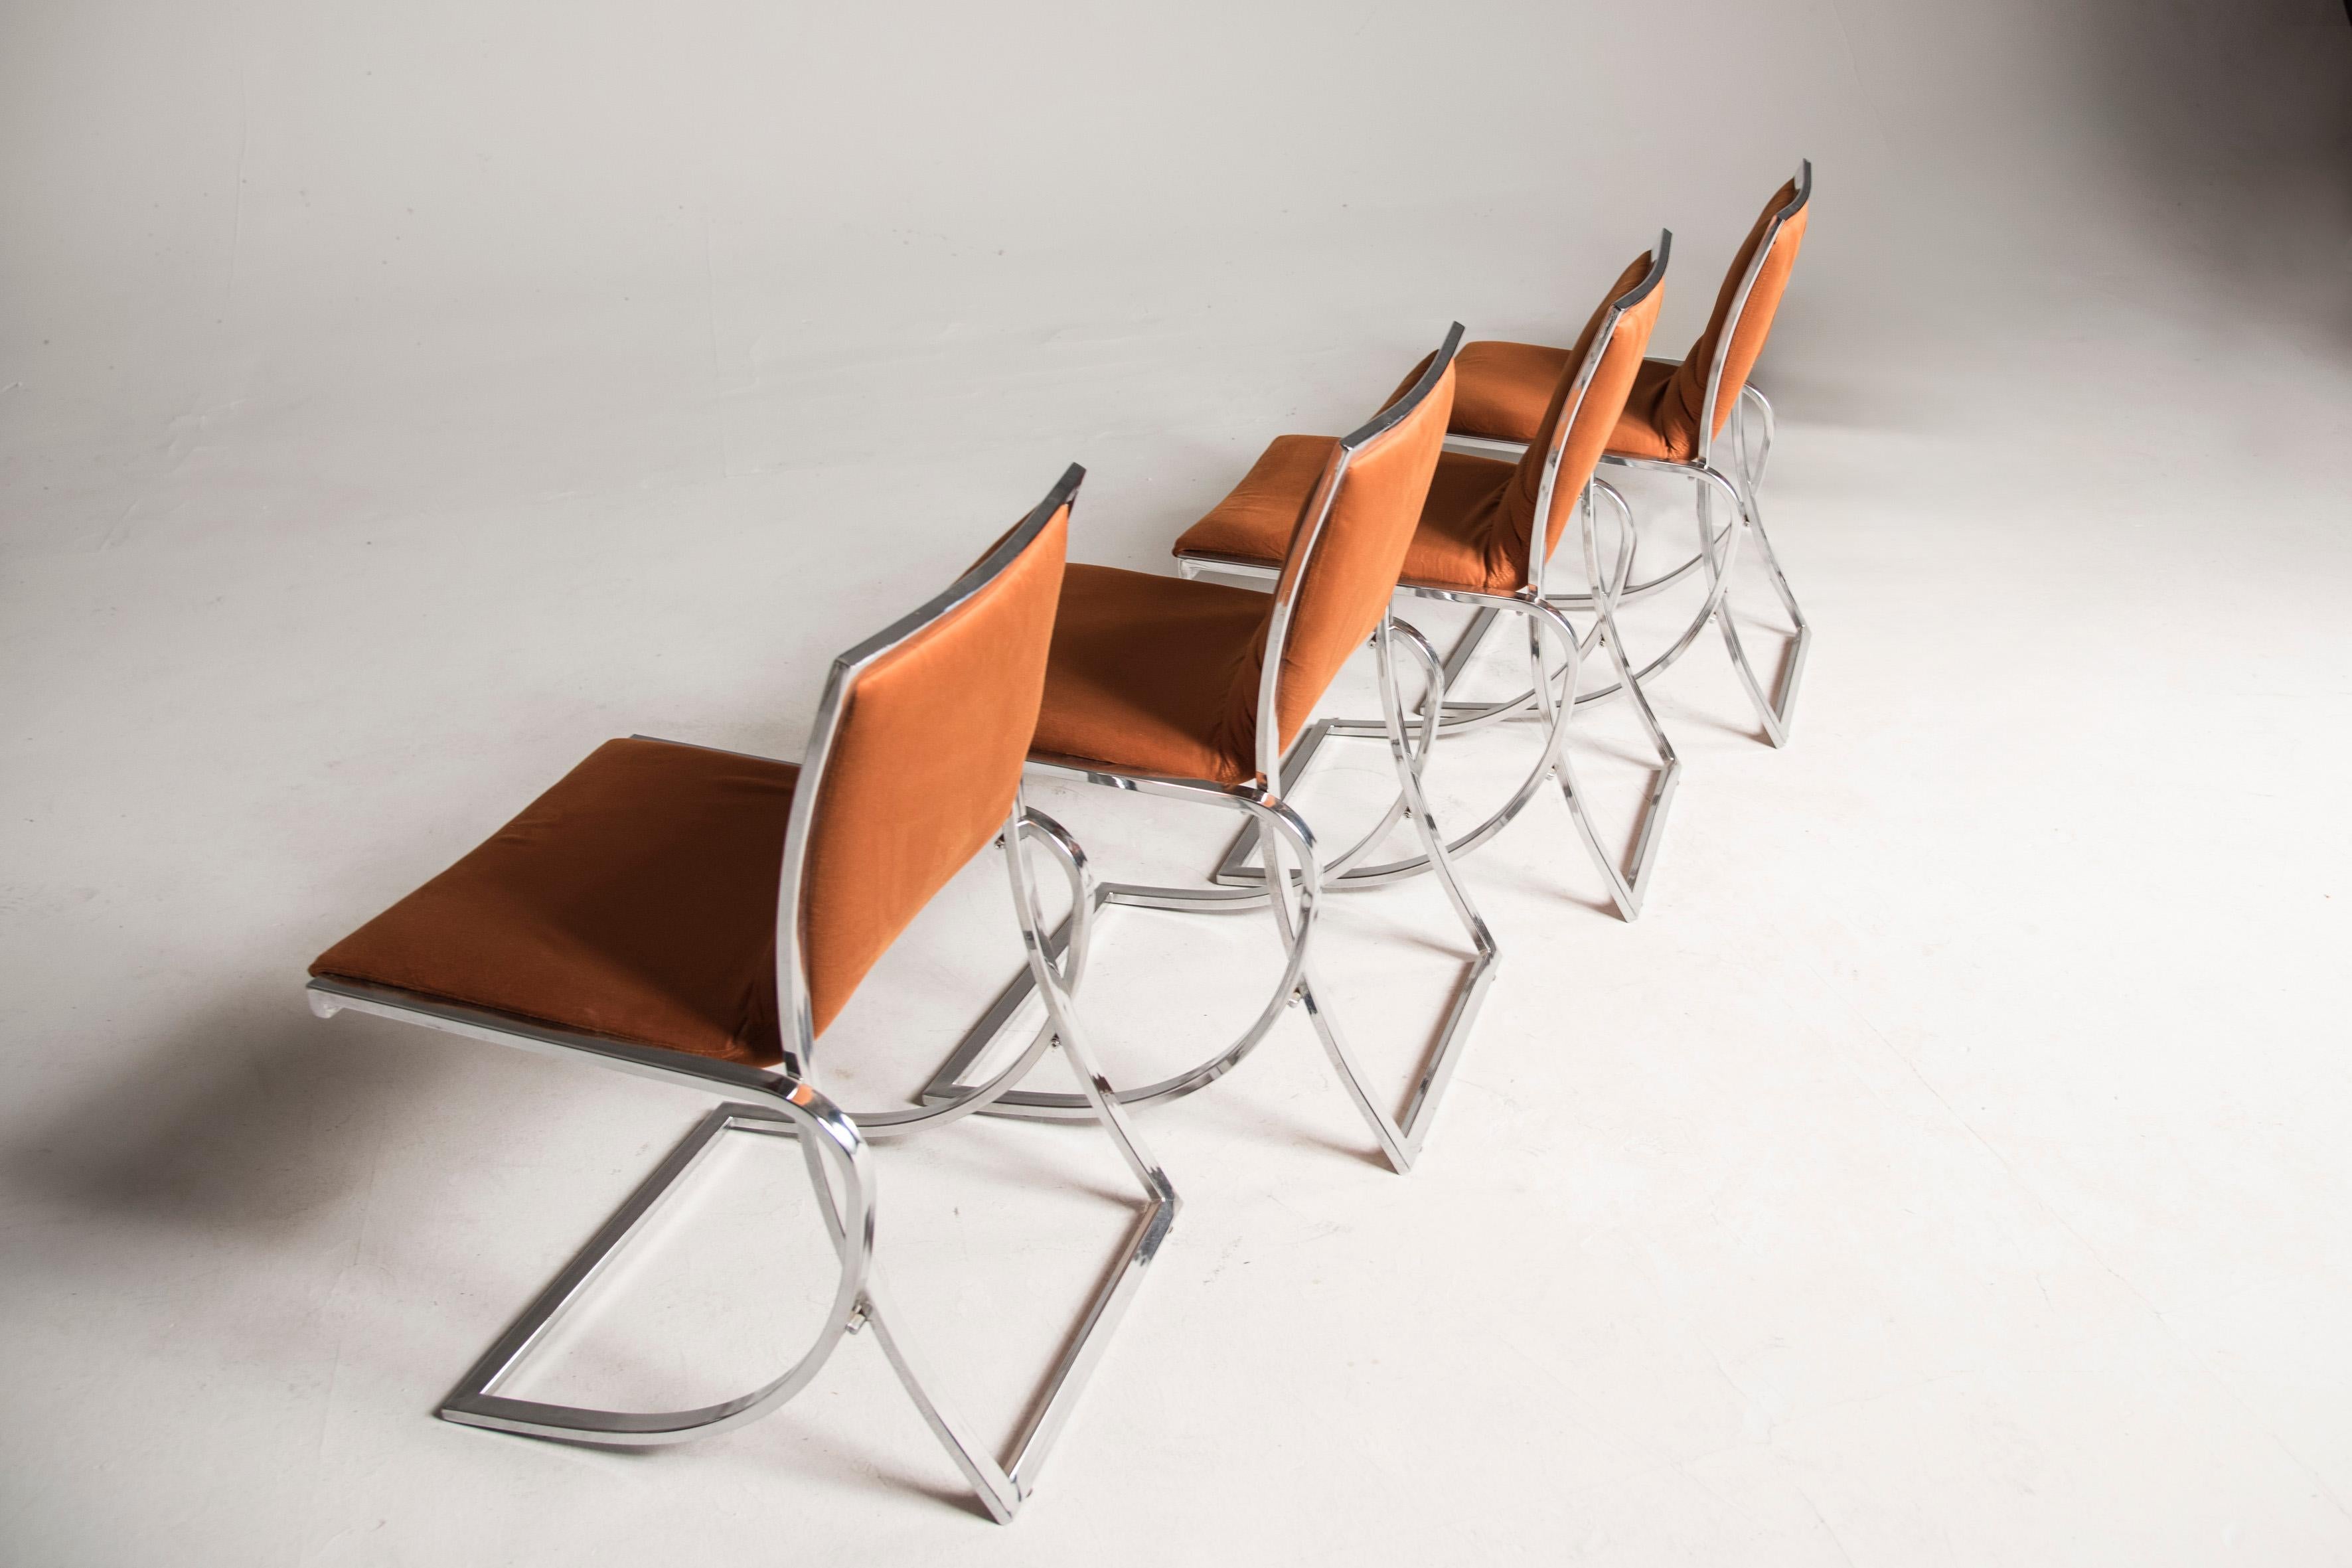 1970s Orange Upholstery Chromed Steel Chairs Set of 4 For Sale 1